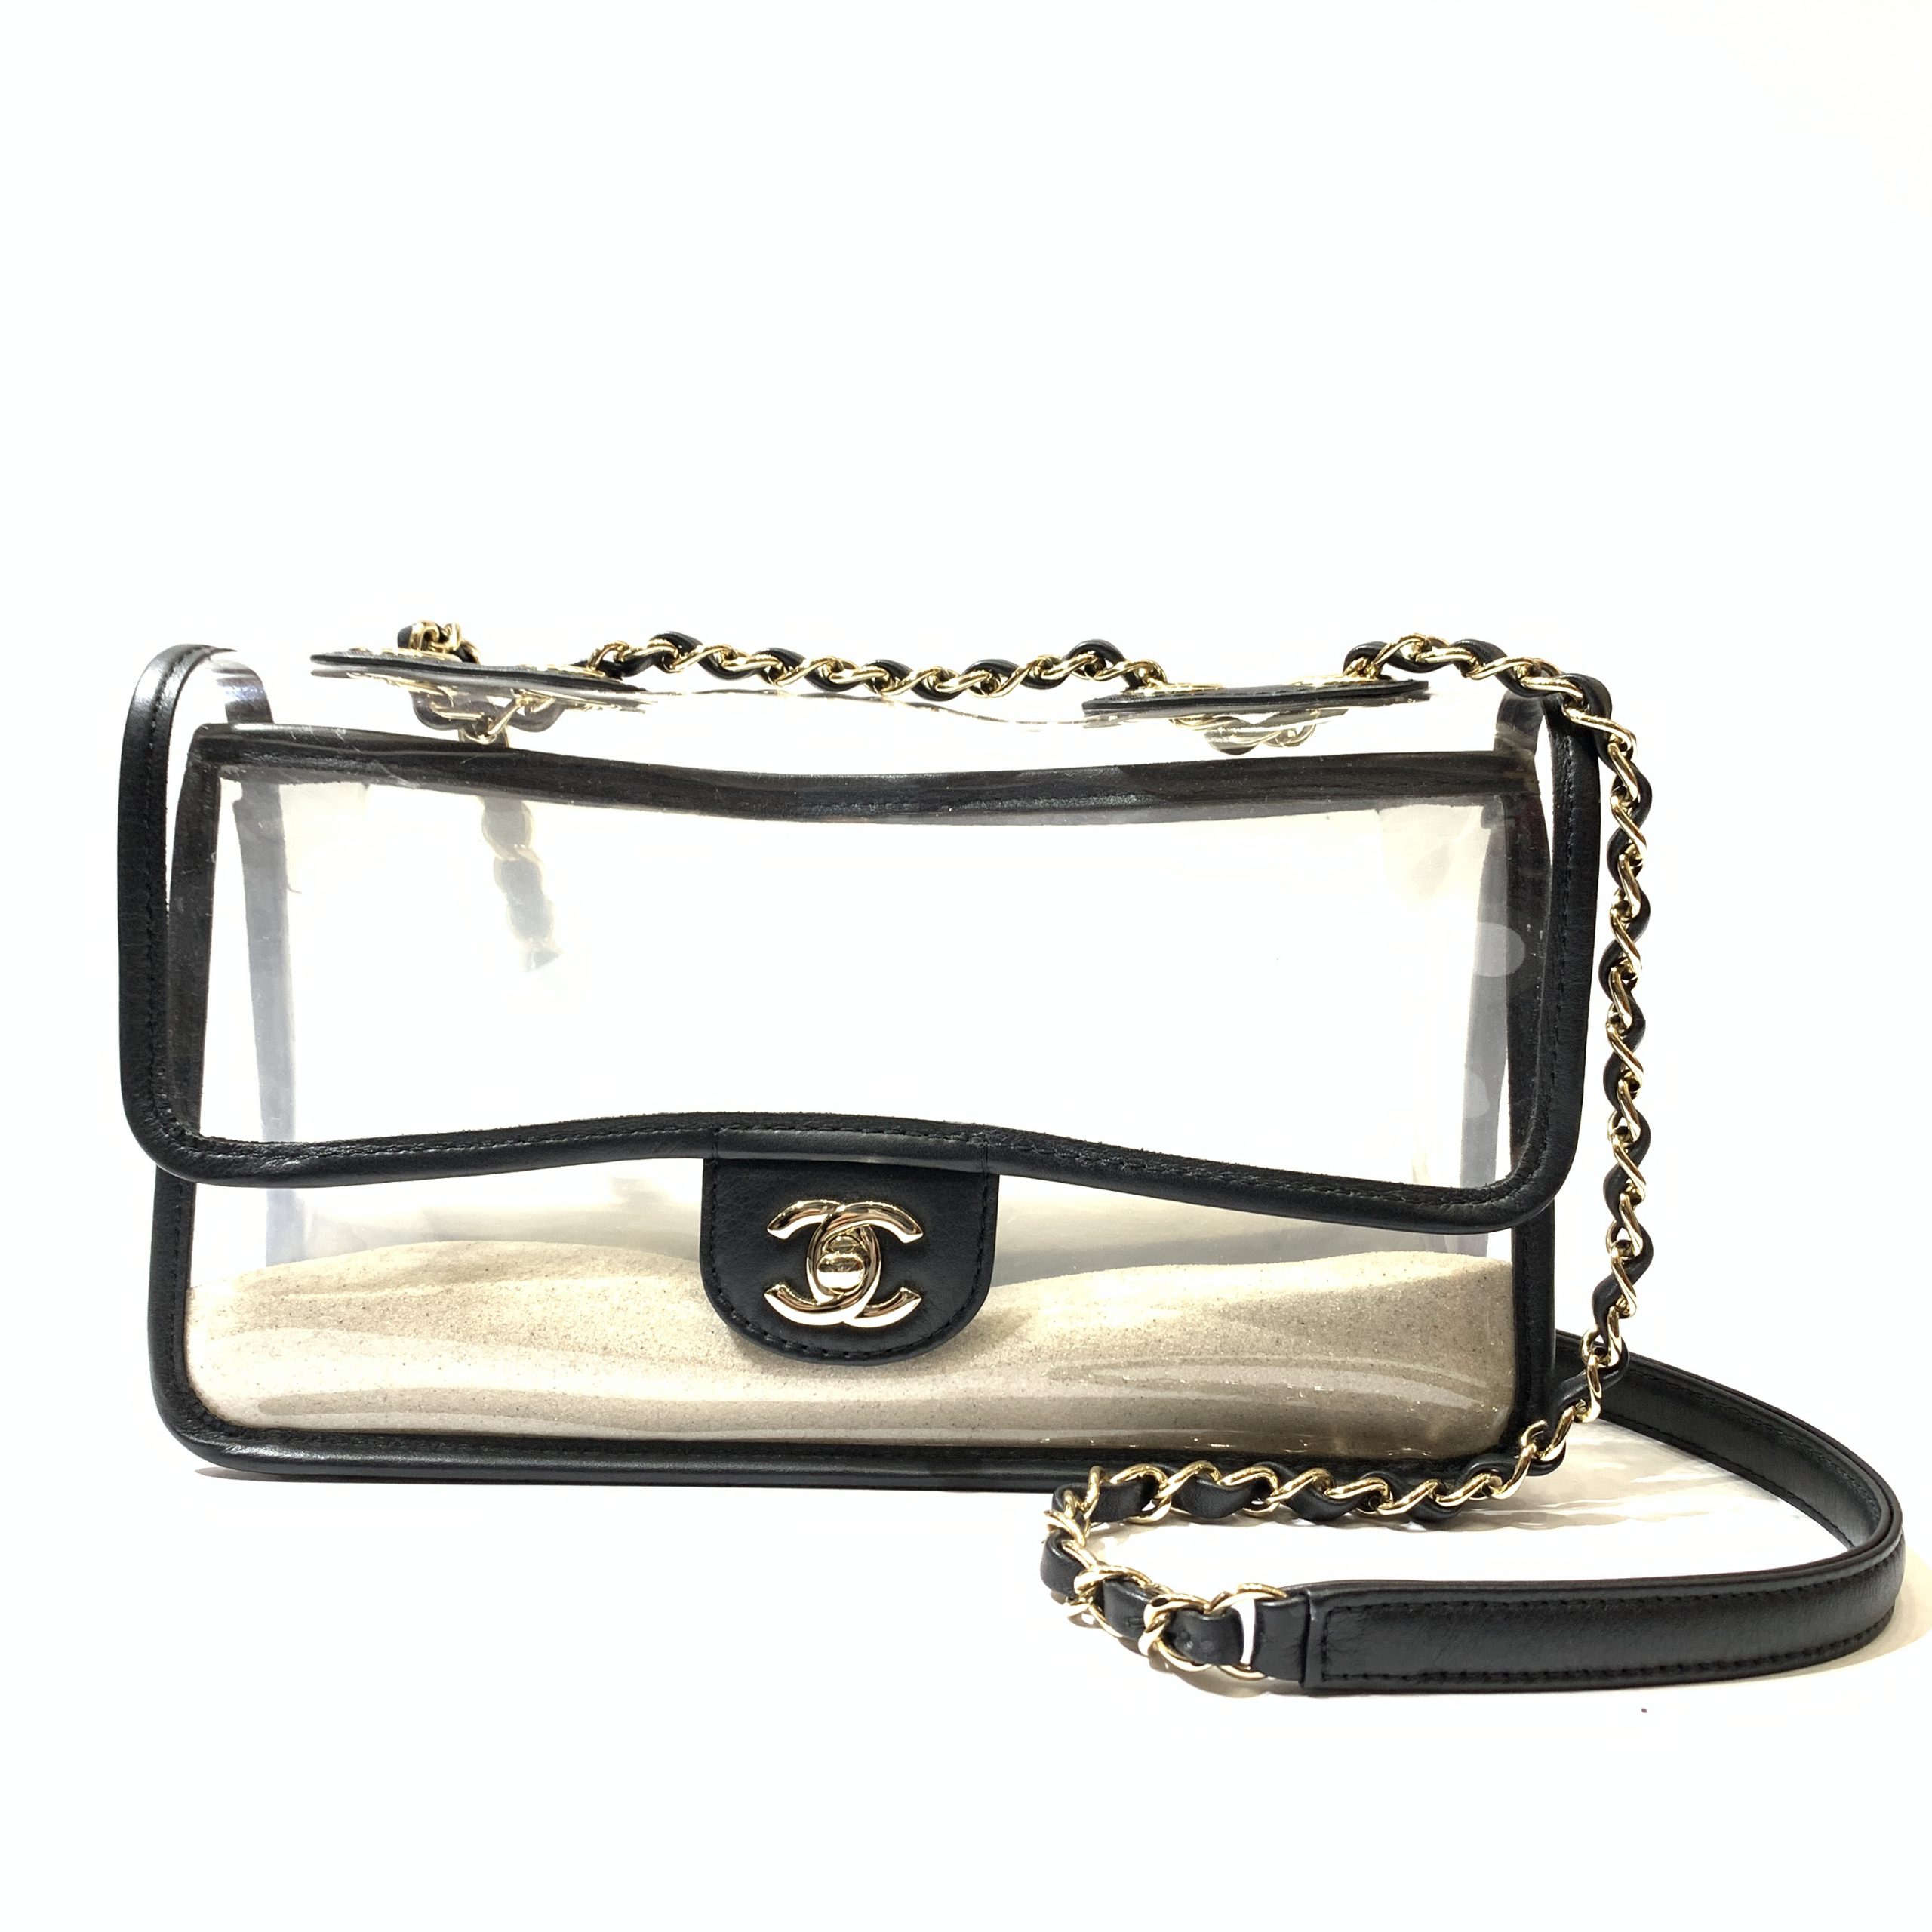 Chanel Black Lambskin PVC Sand by The Sea Medium Flap Bag - Handbag | Pre-owned & Certified | used Second Hand | Unisex